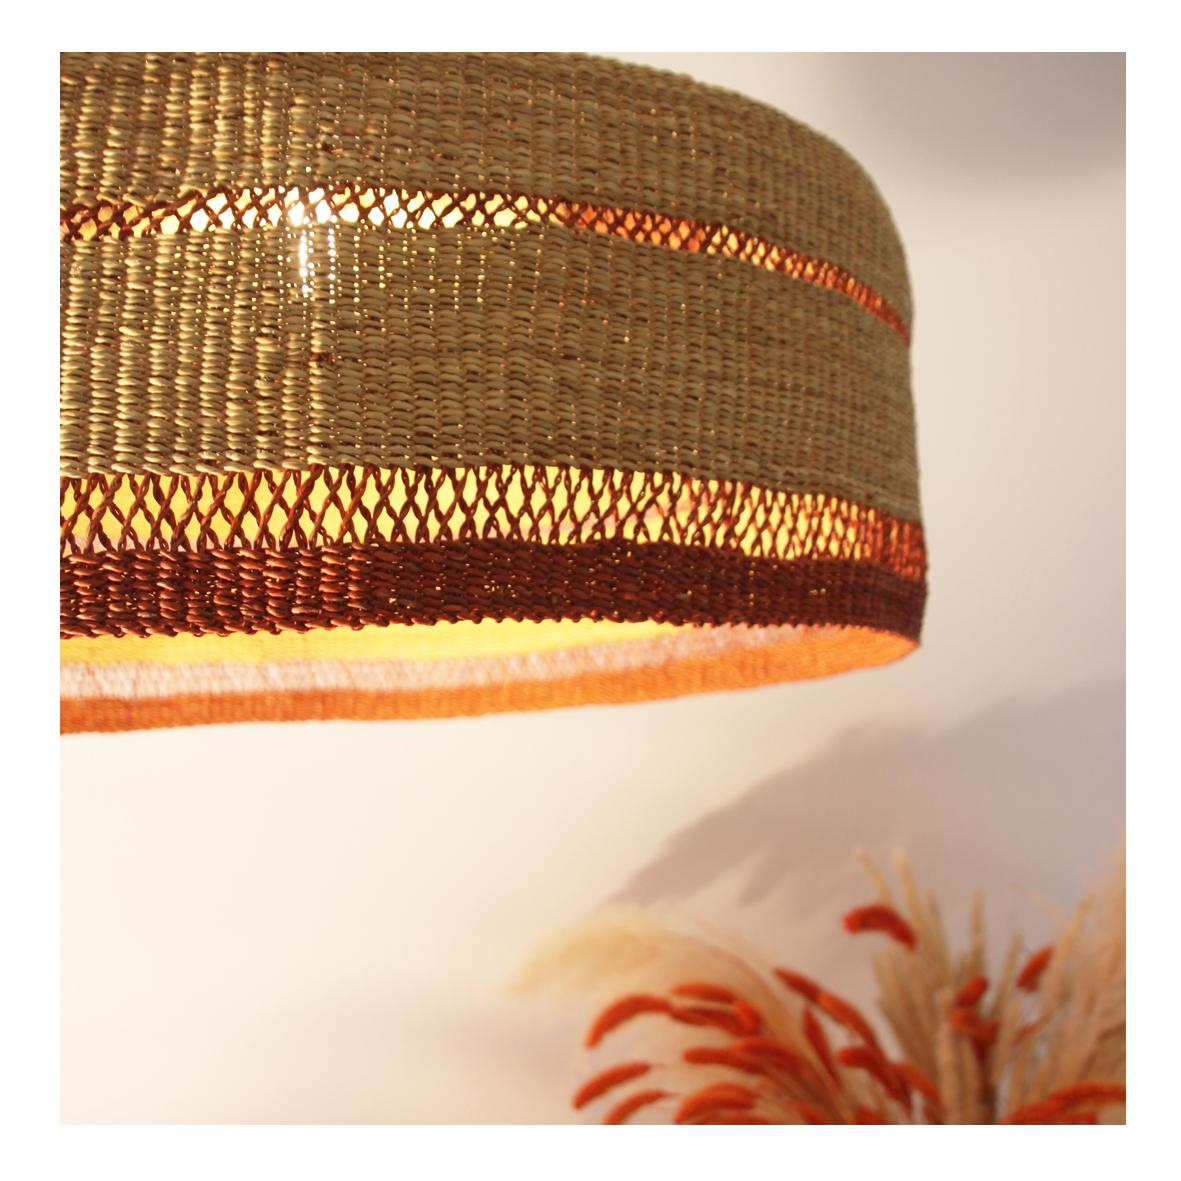 Hand-Woven Handwoven Large Pendant Lamp Wide Rim Straw Terracotta Natural